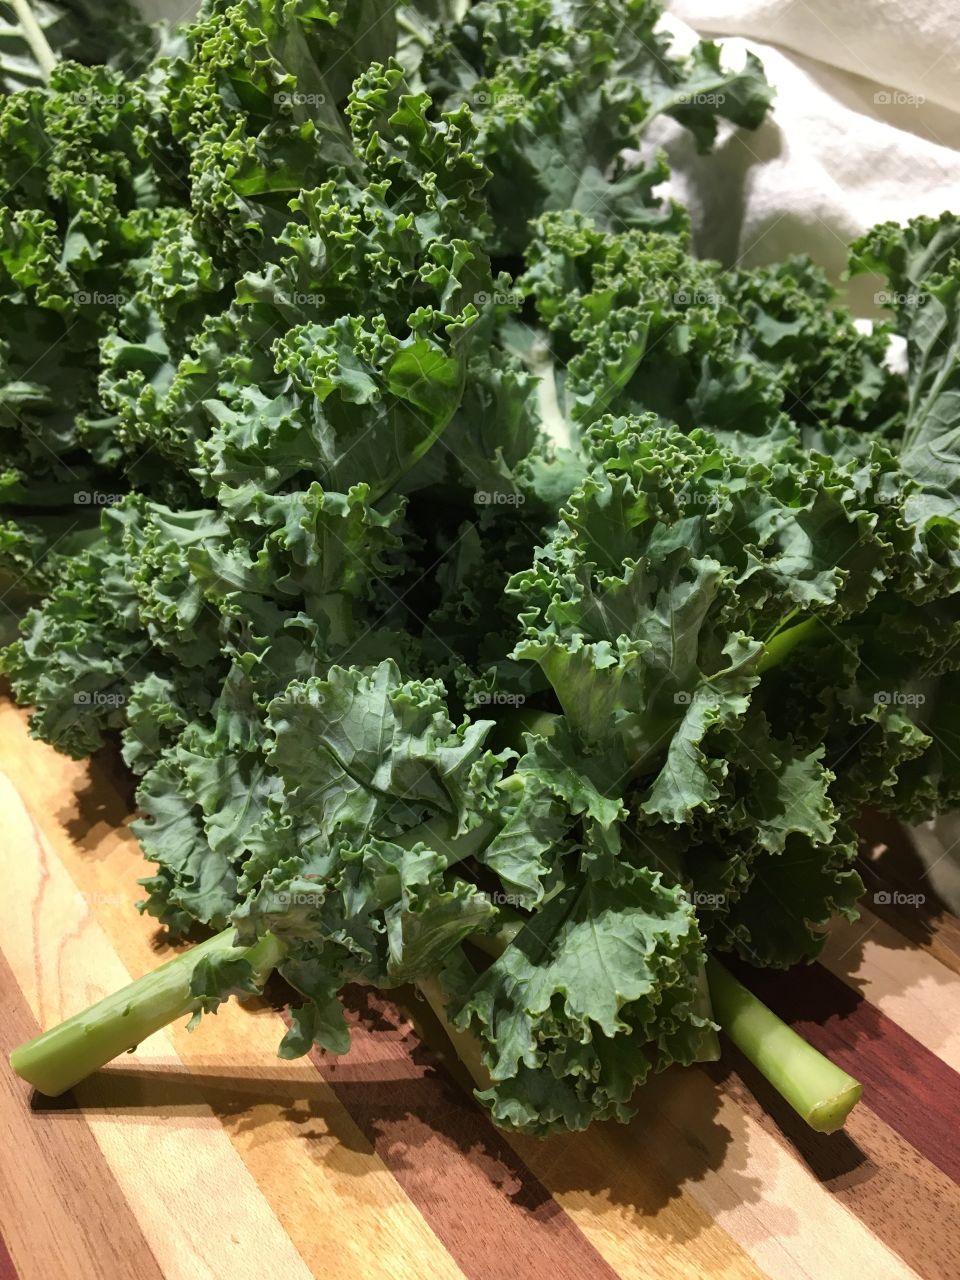 Bunch of curly kale